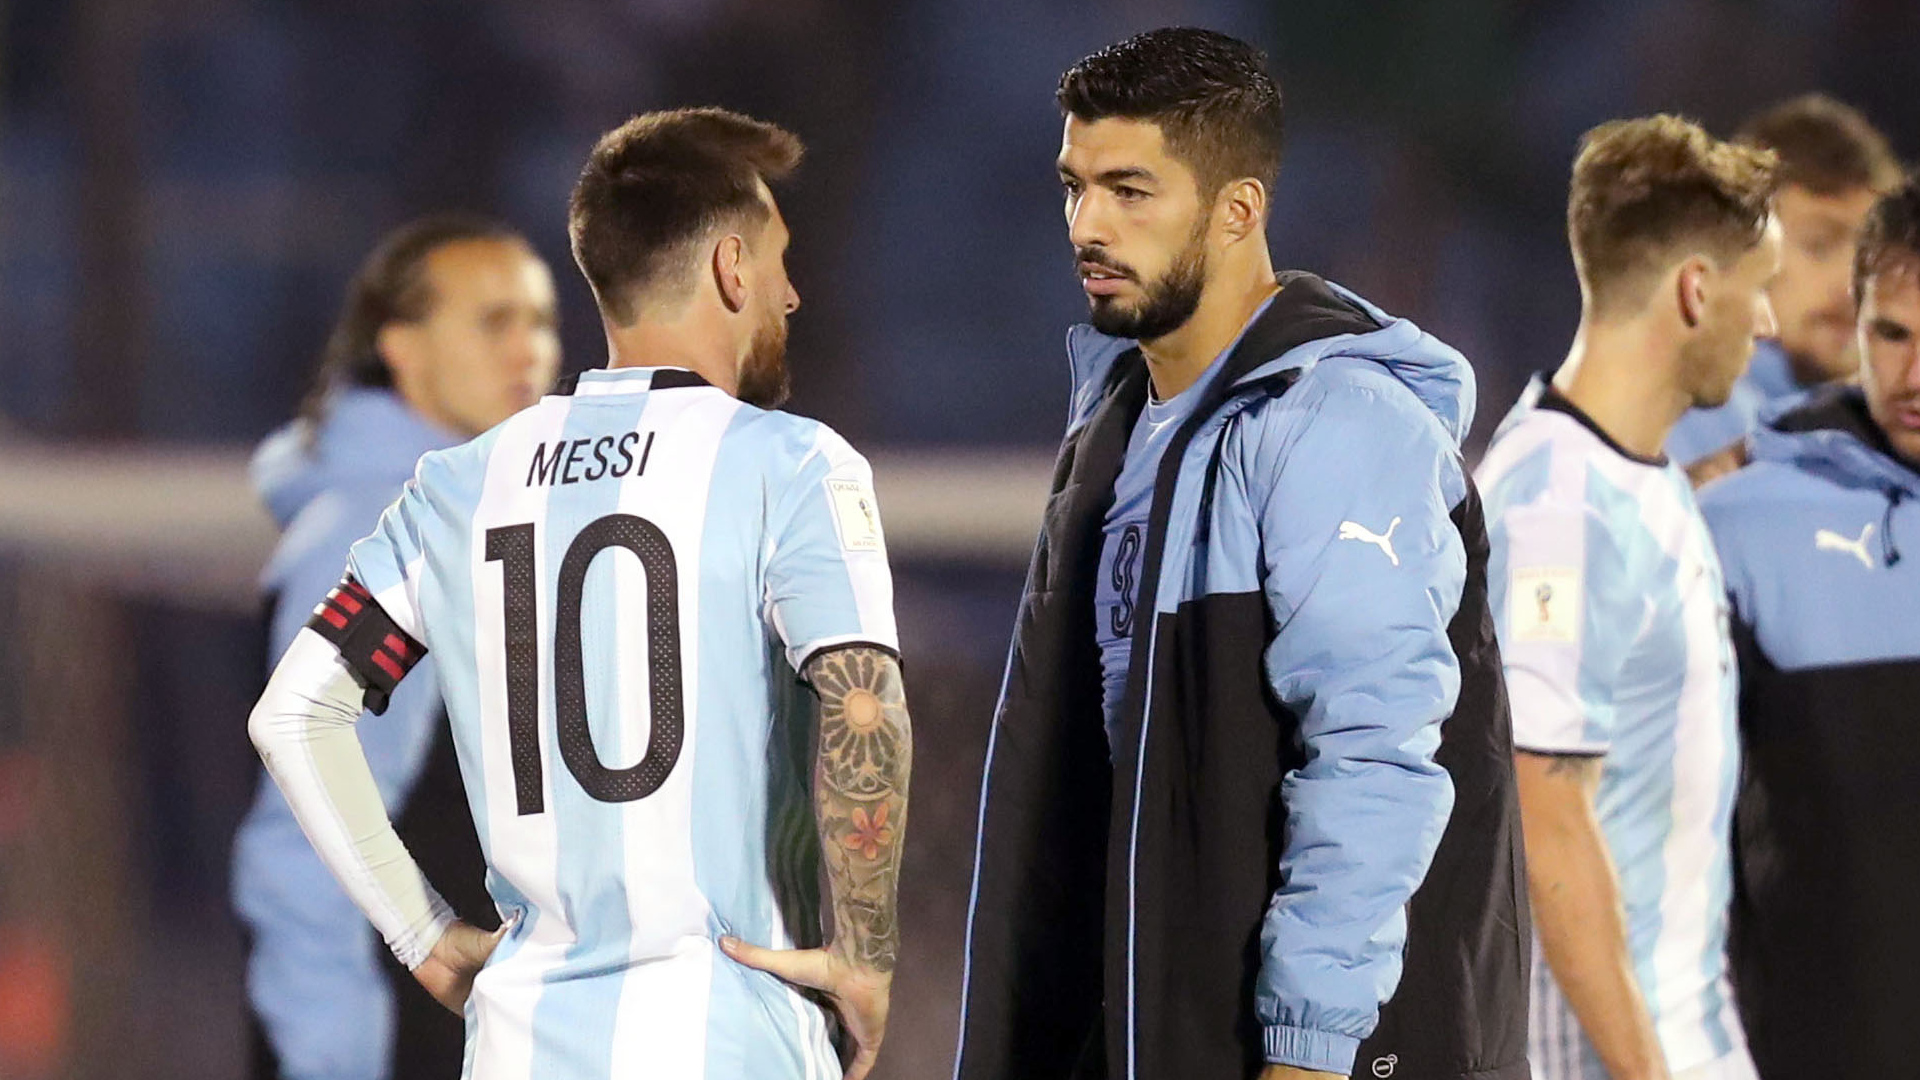 Palestinians Urge Lionel Messi and Luis Suárez to Cancel “Friendly” Match in Israel